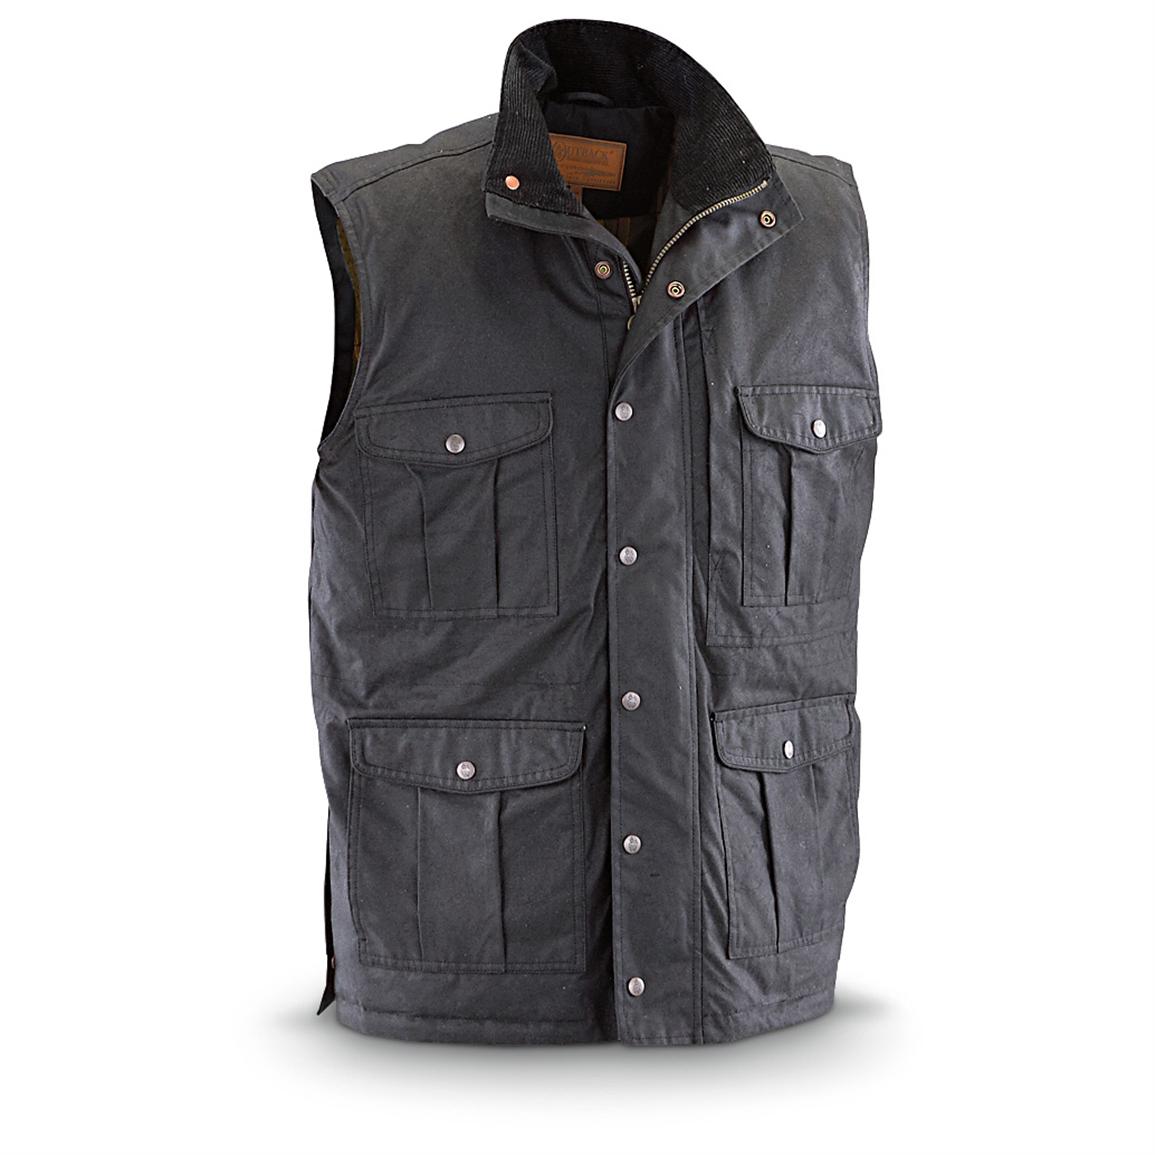 Outback Trading Company Conceal and Carry Buranda Vest - 299886, Vests ...